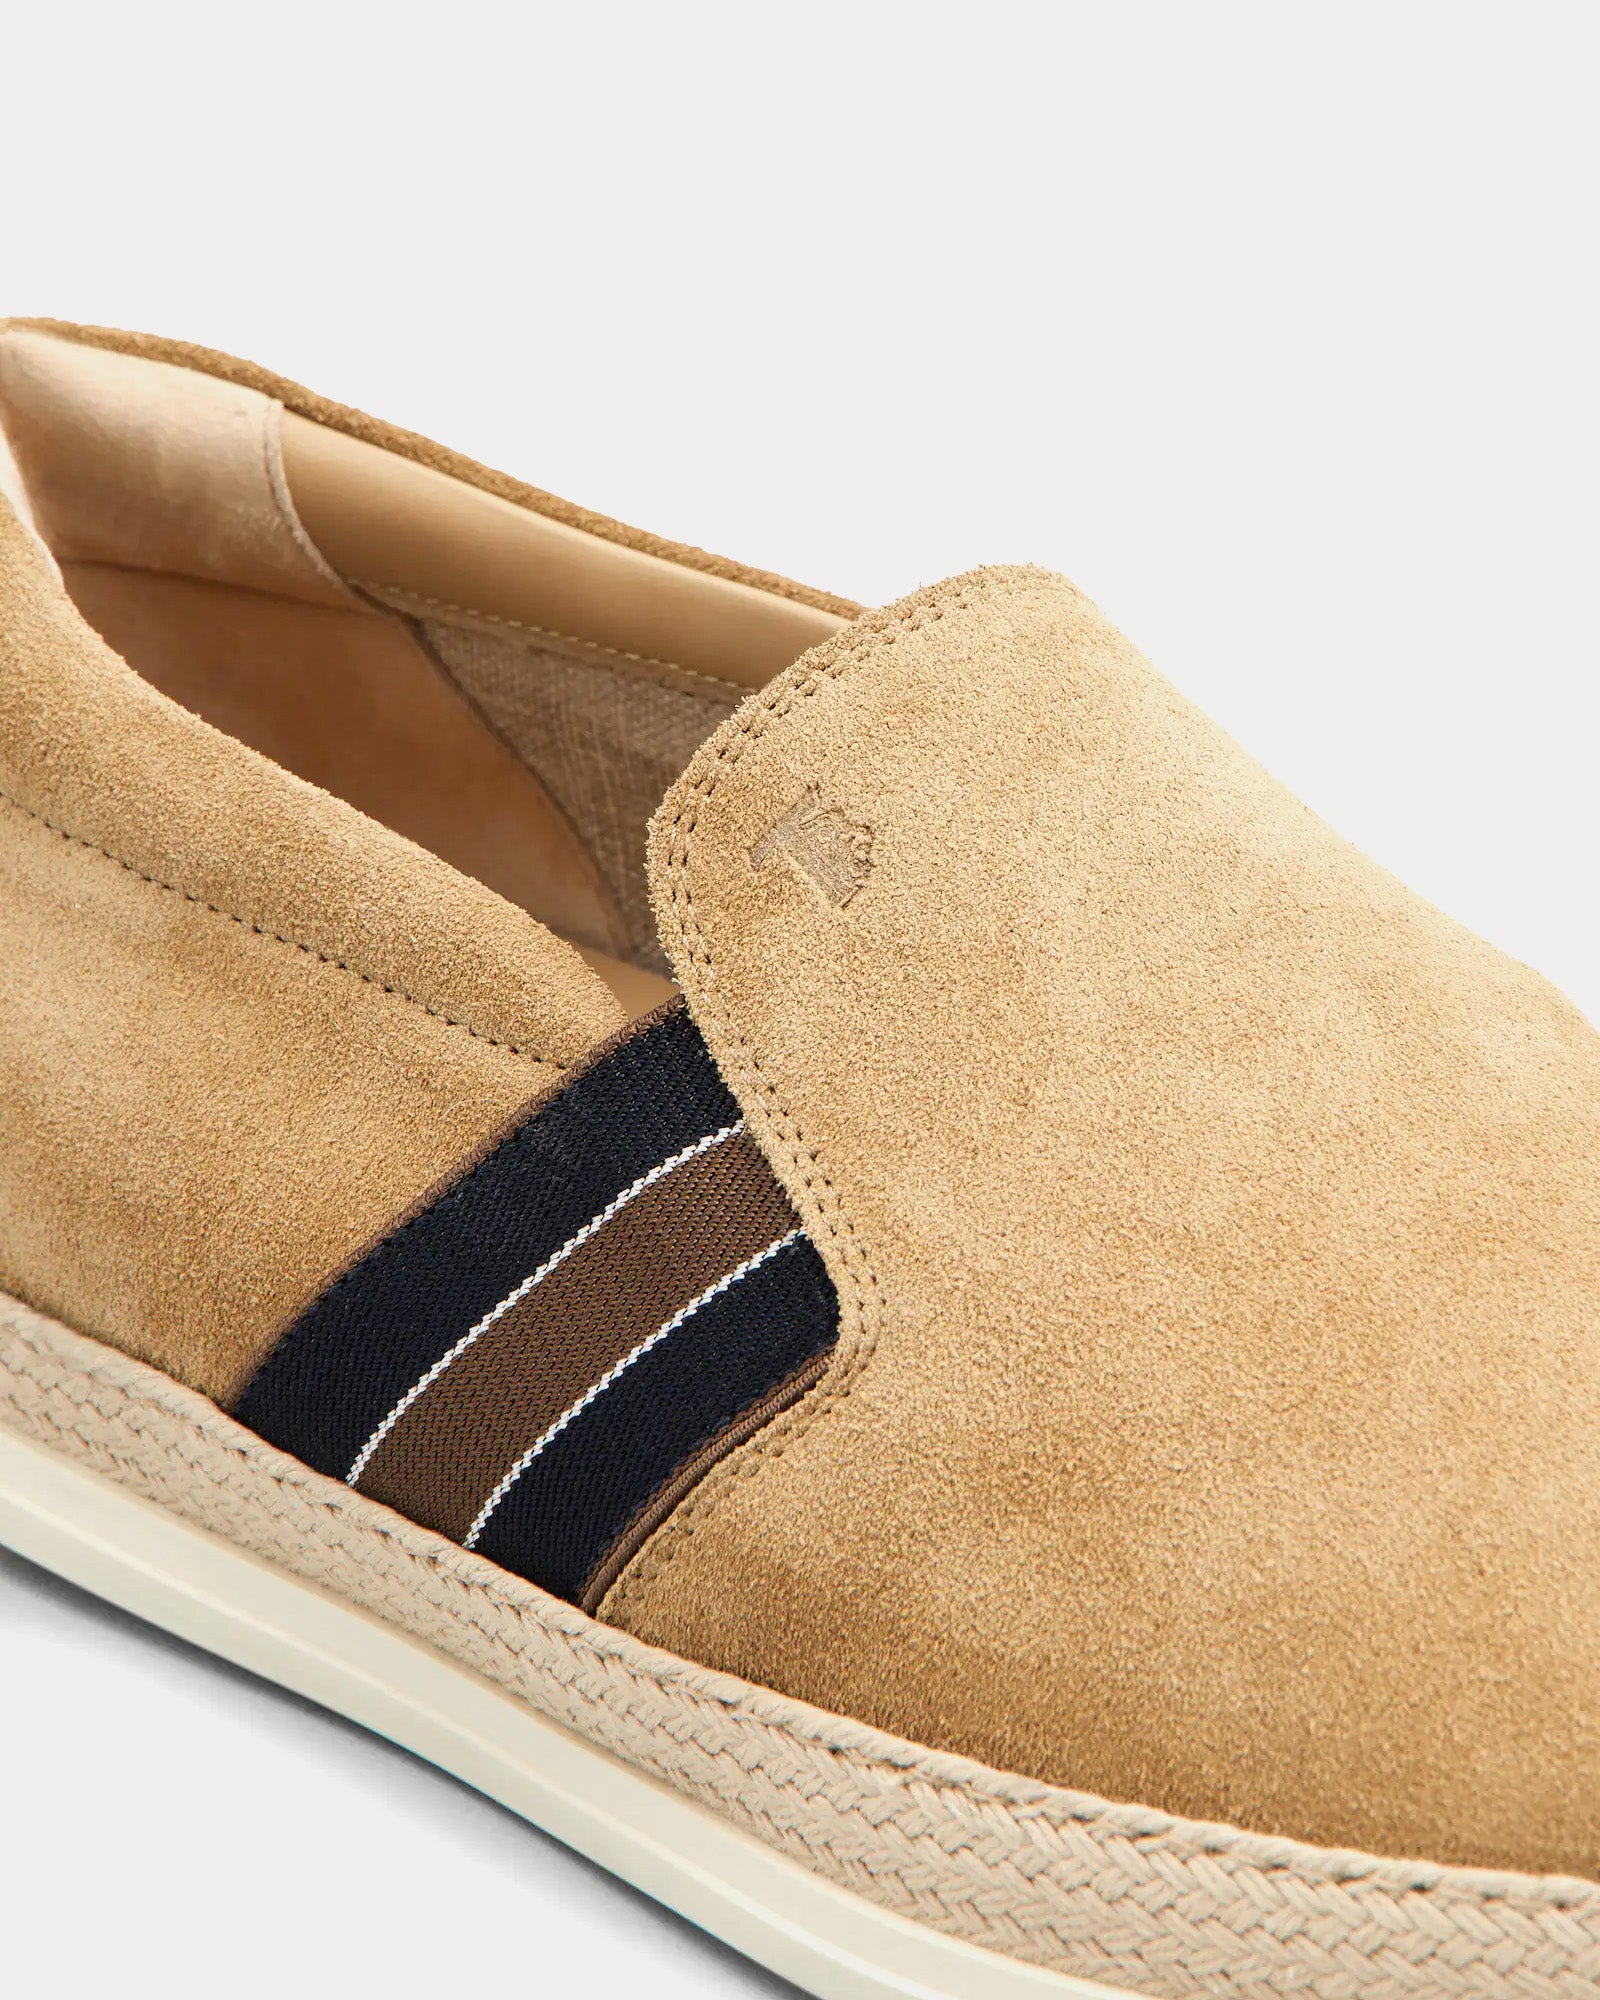 Tod's - Suede Beige / Brown / Black Loafers